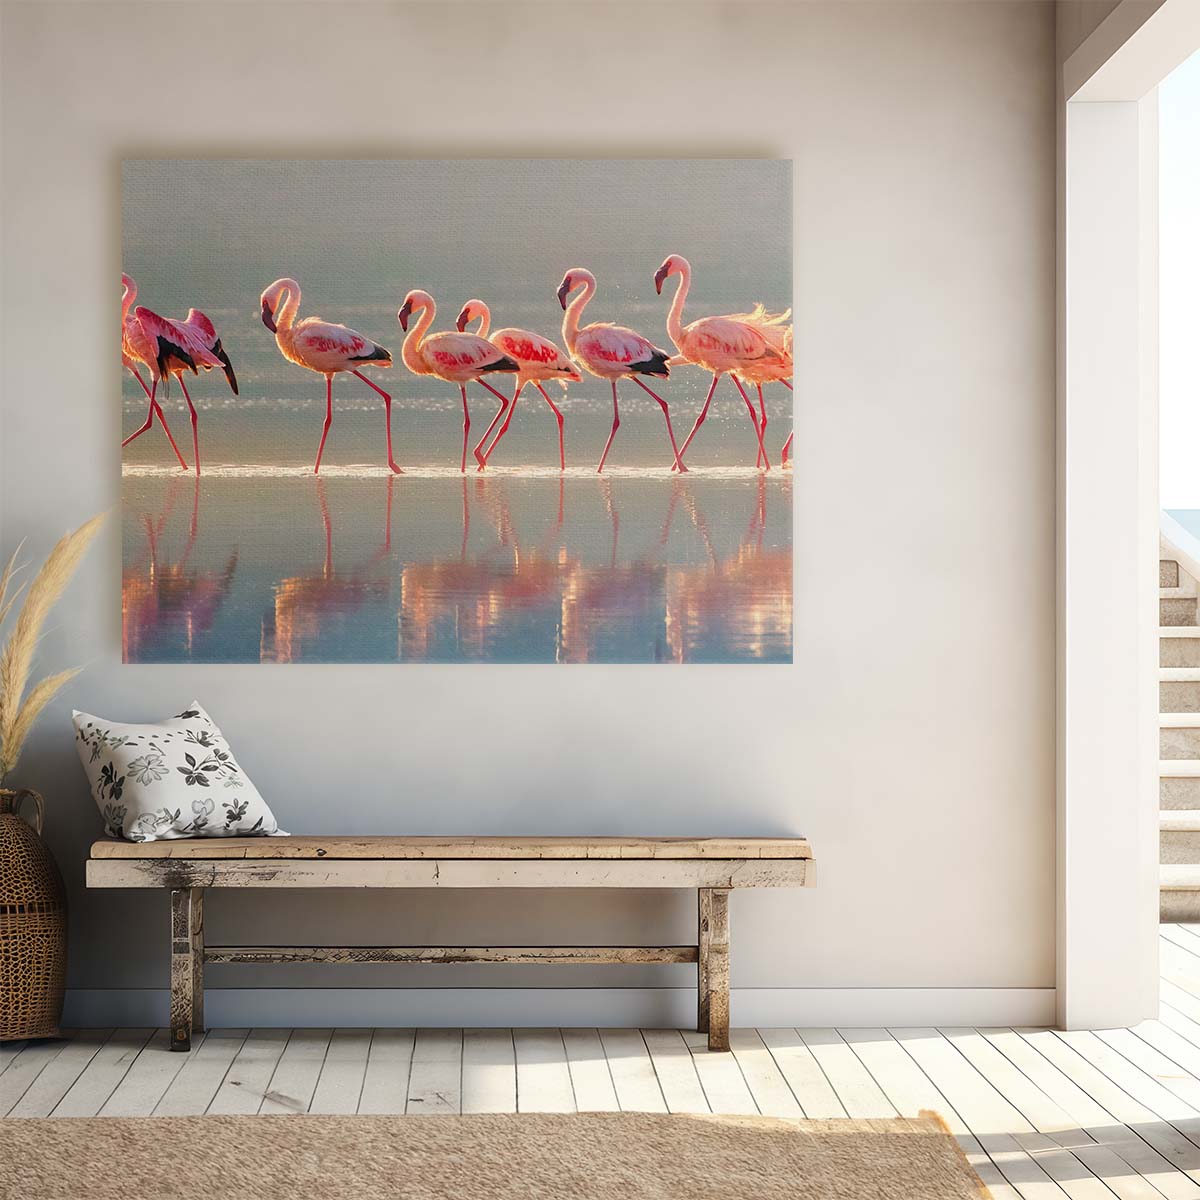 Romantic Flamingo Flock Reflection Wildlife Wall Art by Luxuriance Designs. Made in USA.